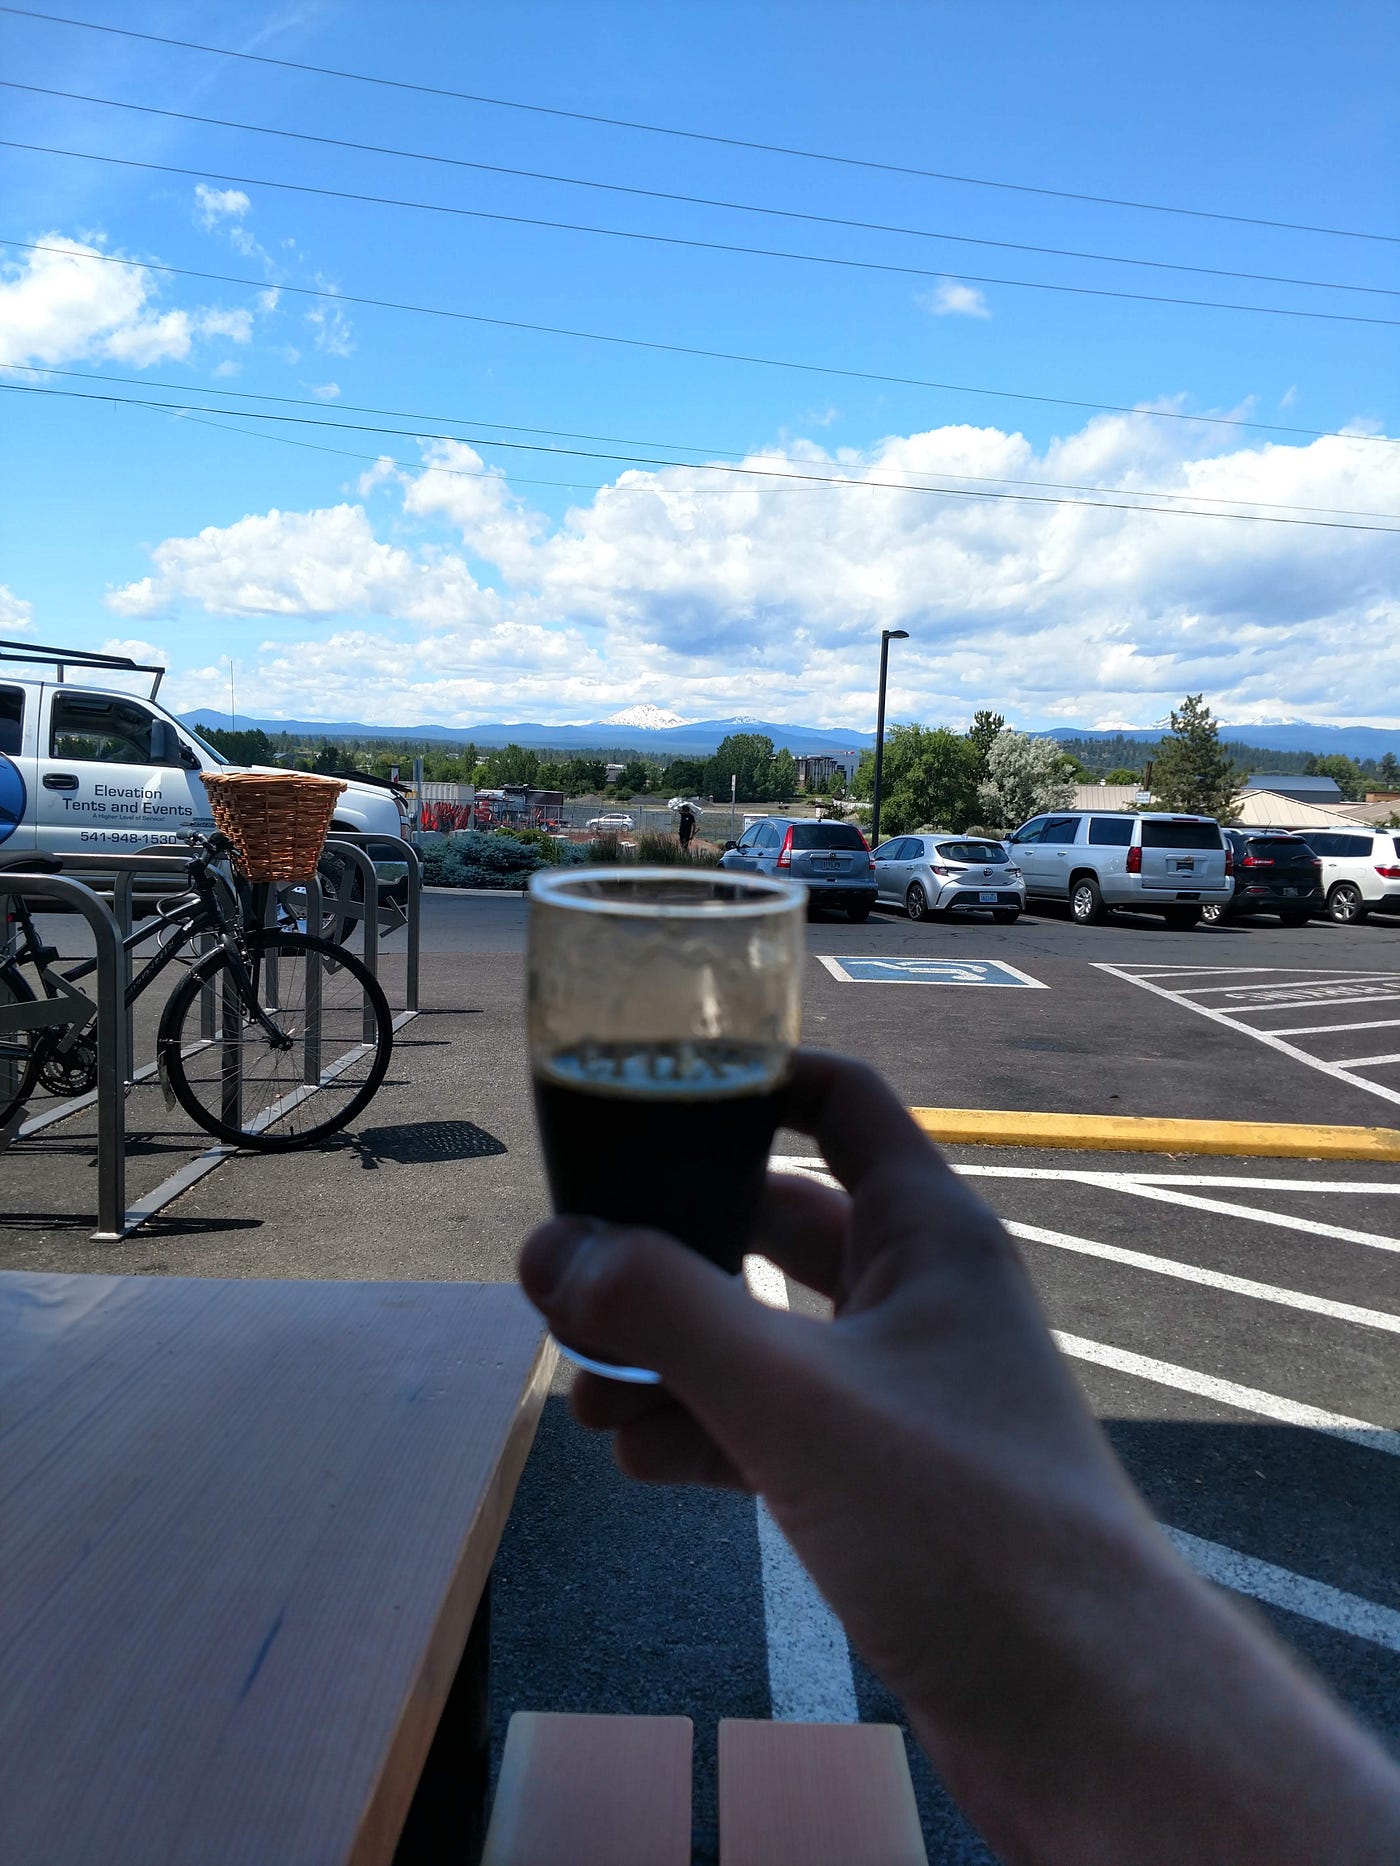 Raising a toast to Mt. Bachelor wasn’t the hardest of actions, but at least it was taking action (photo by author)